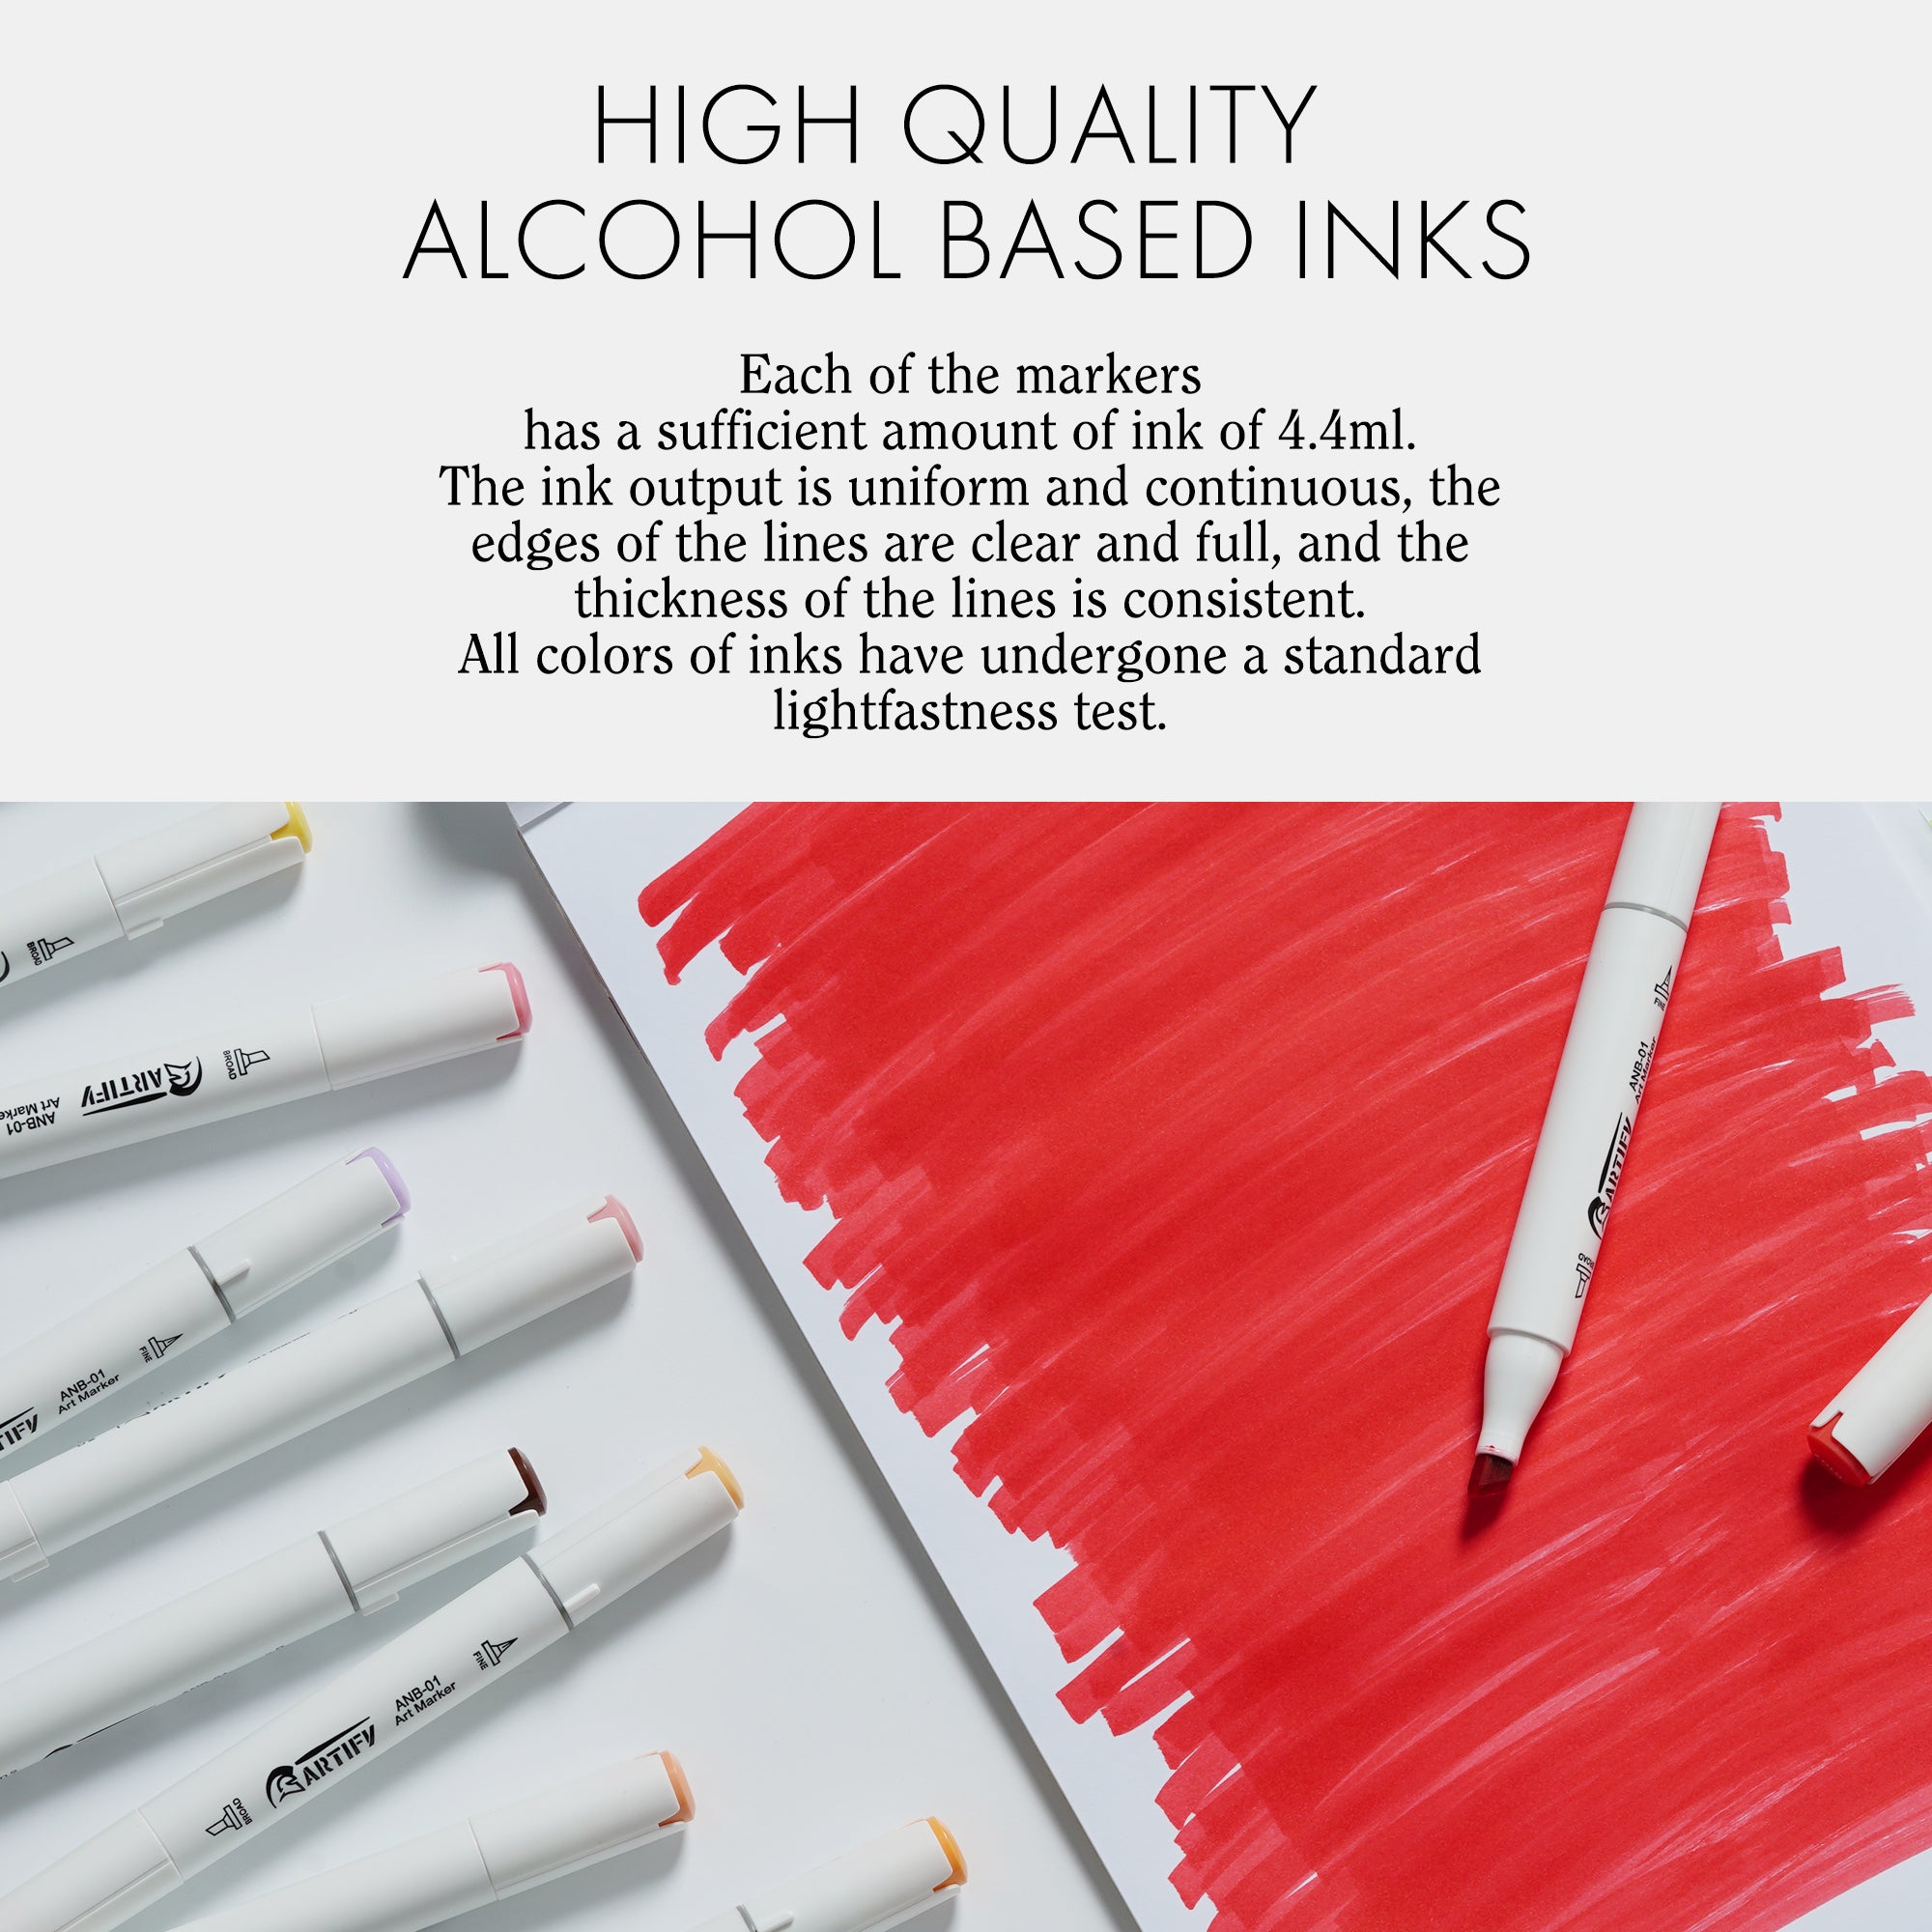  ARTIFY Alcohol Brush Markers, Brush & Chisel Dual